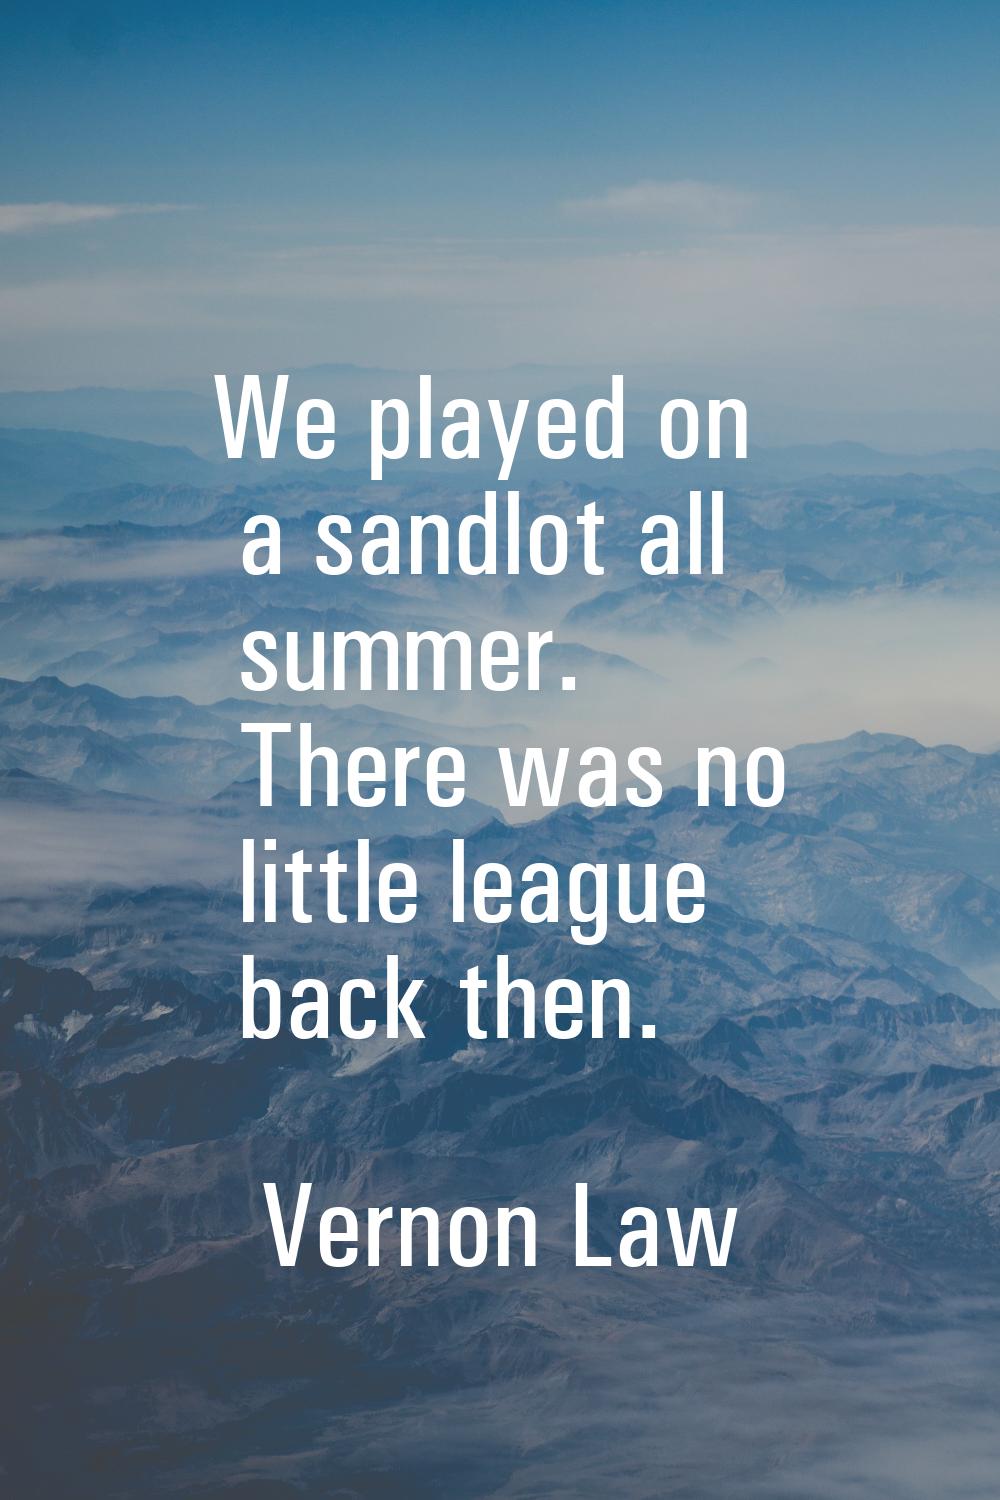 We played on a sandlot all summer. There was no little league back then.